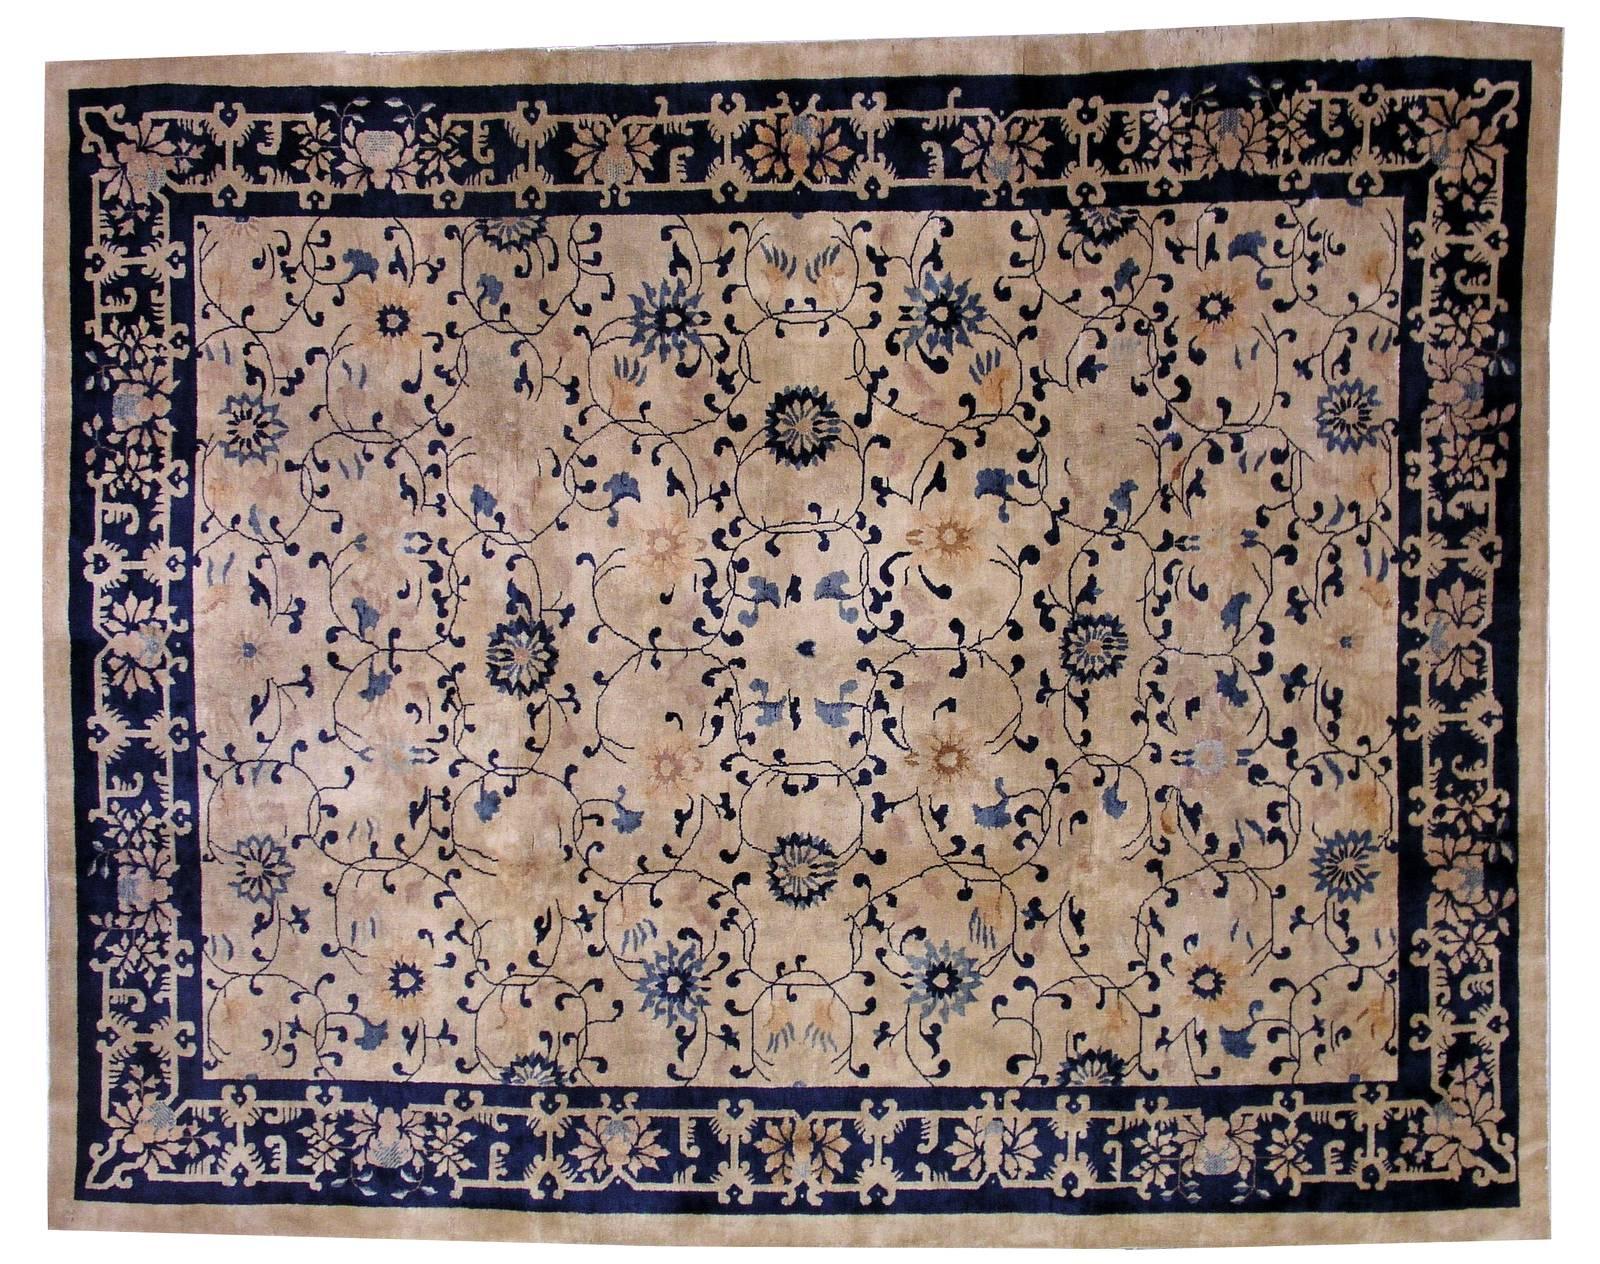 Antique Peking Chinese rug in good condition. The rug has very unusual design for typical Chinese Peking rugs. Very busy floral ornaments in blue shade covering beige background. The border is in navy blue shade. The rug is in good condition for its